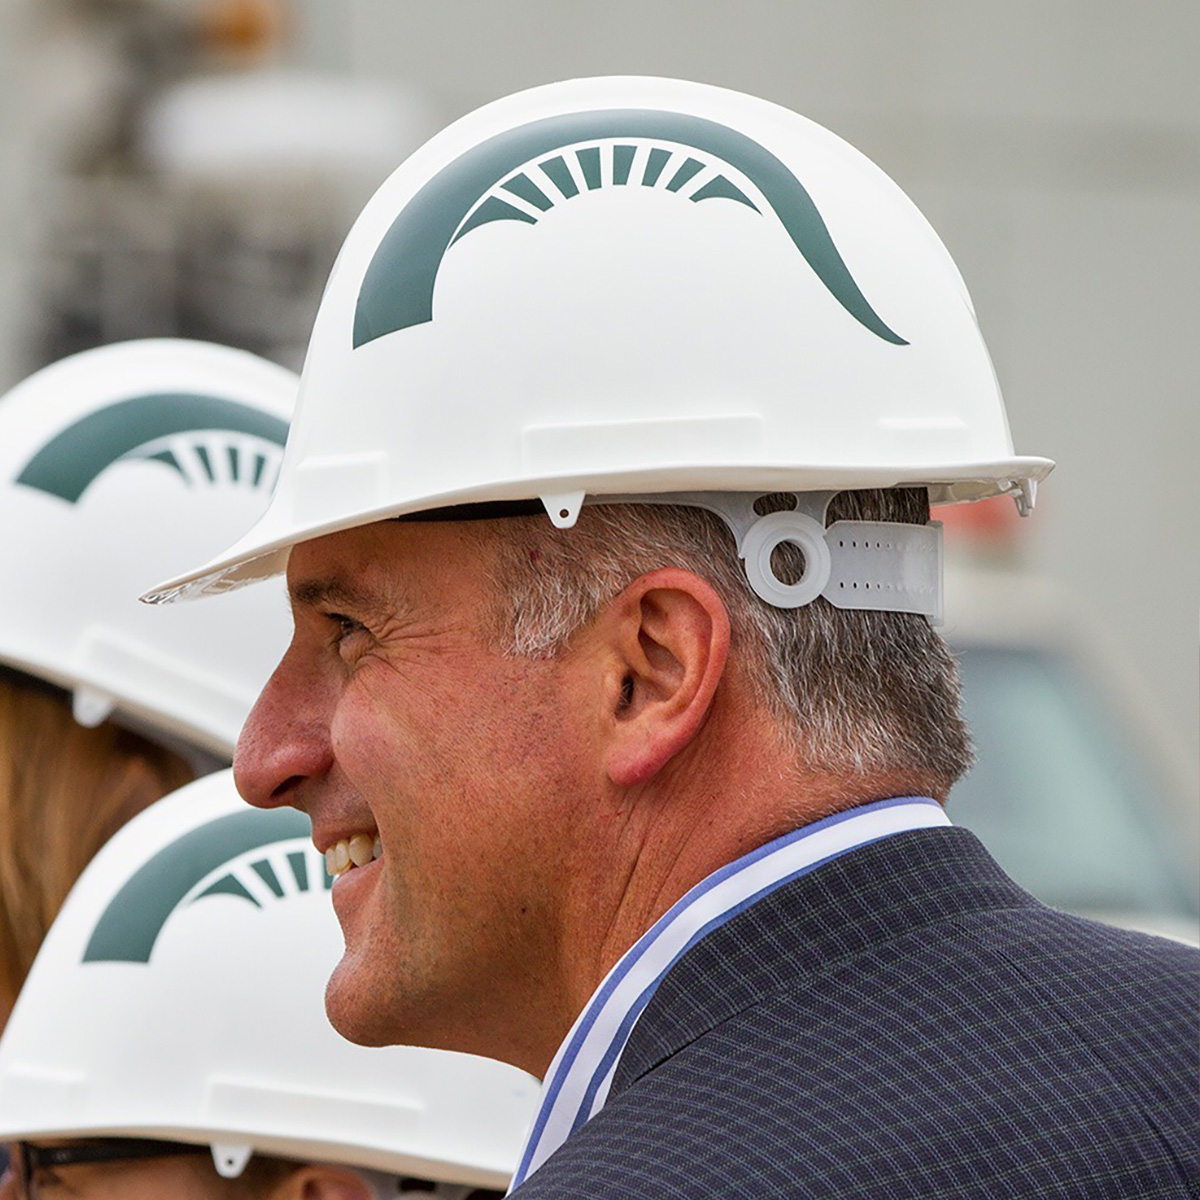 Construction helmets with Sparty plume graphic decal